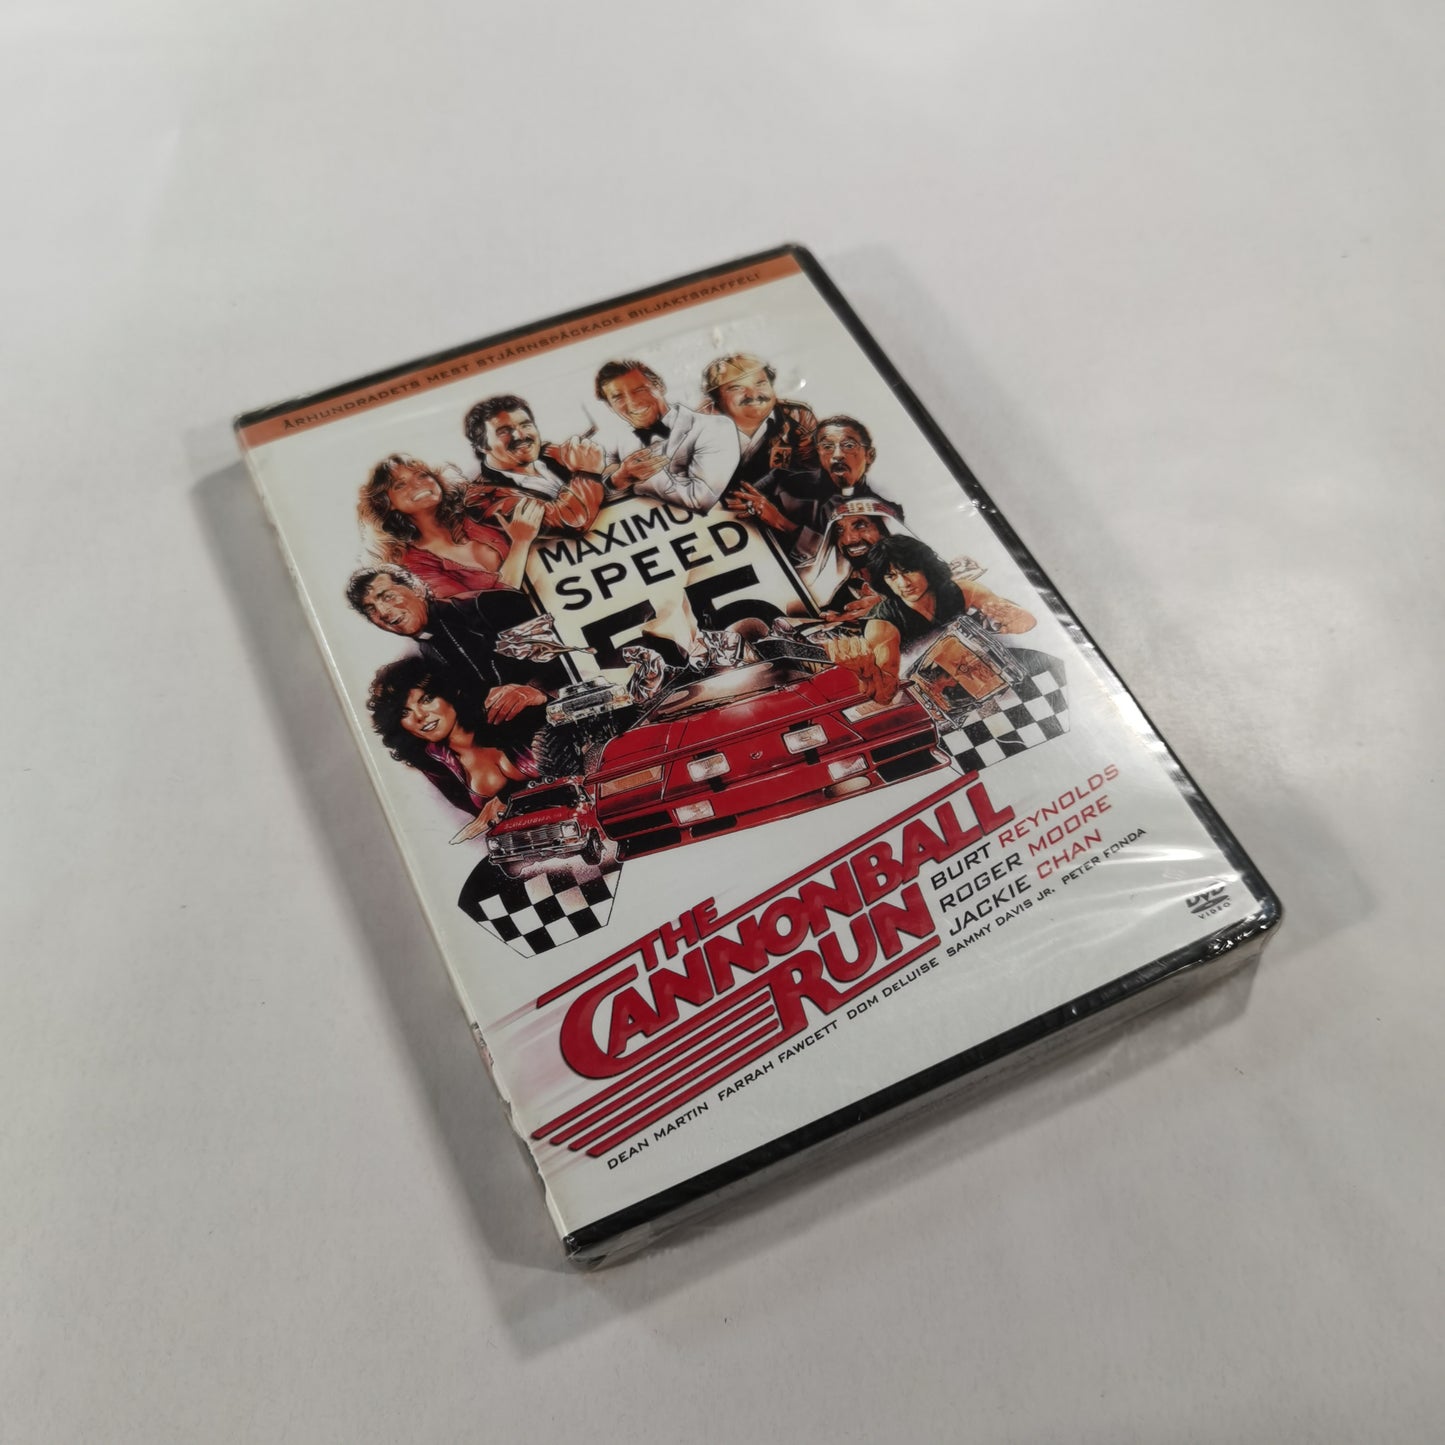 The Cannonball Run (1981) - DVD SE 2004 ( Cover 3058 04111 ) NEW!